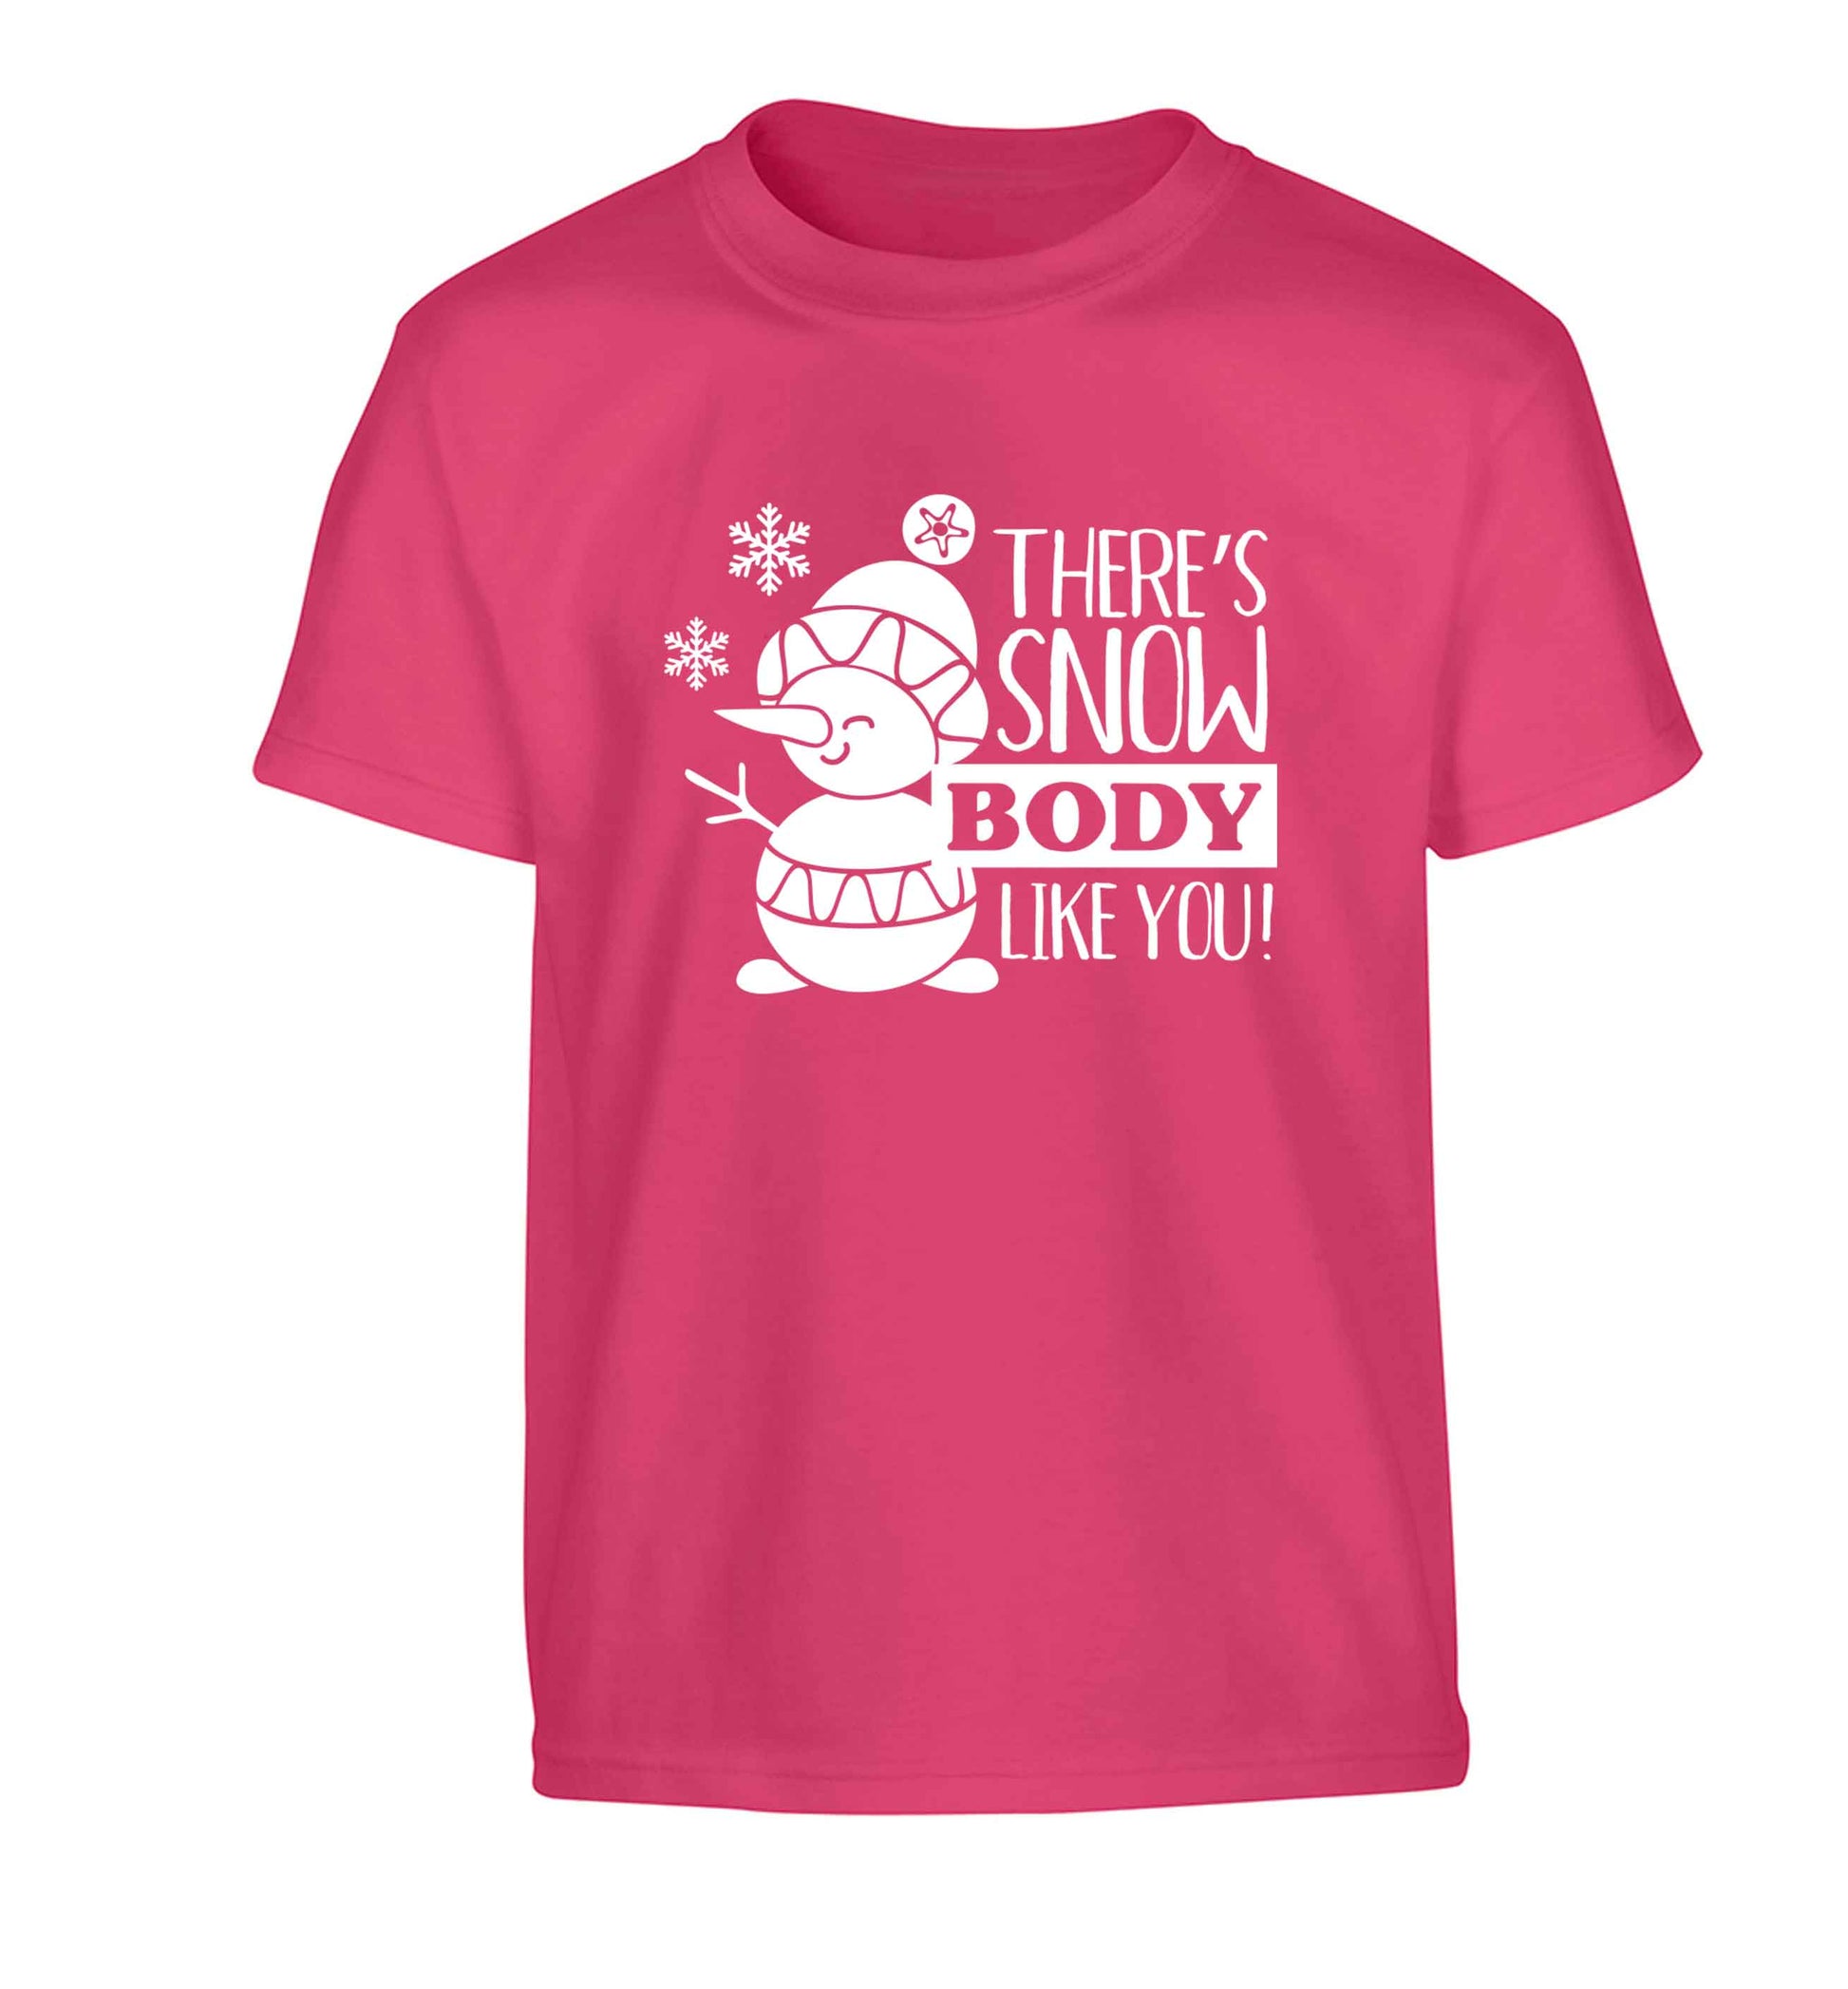 There's snow body like you Children's pink Tshirt 12-13 Years